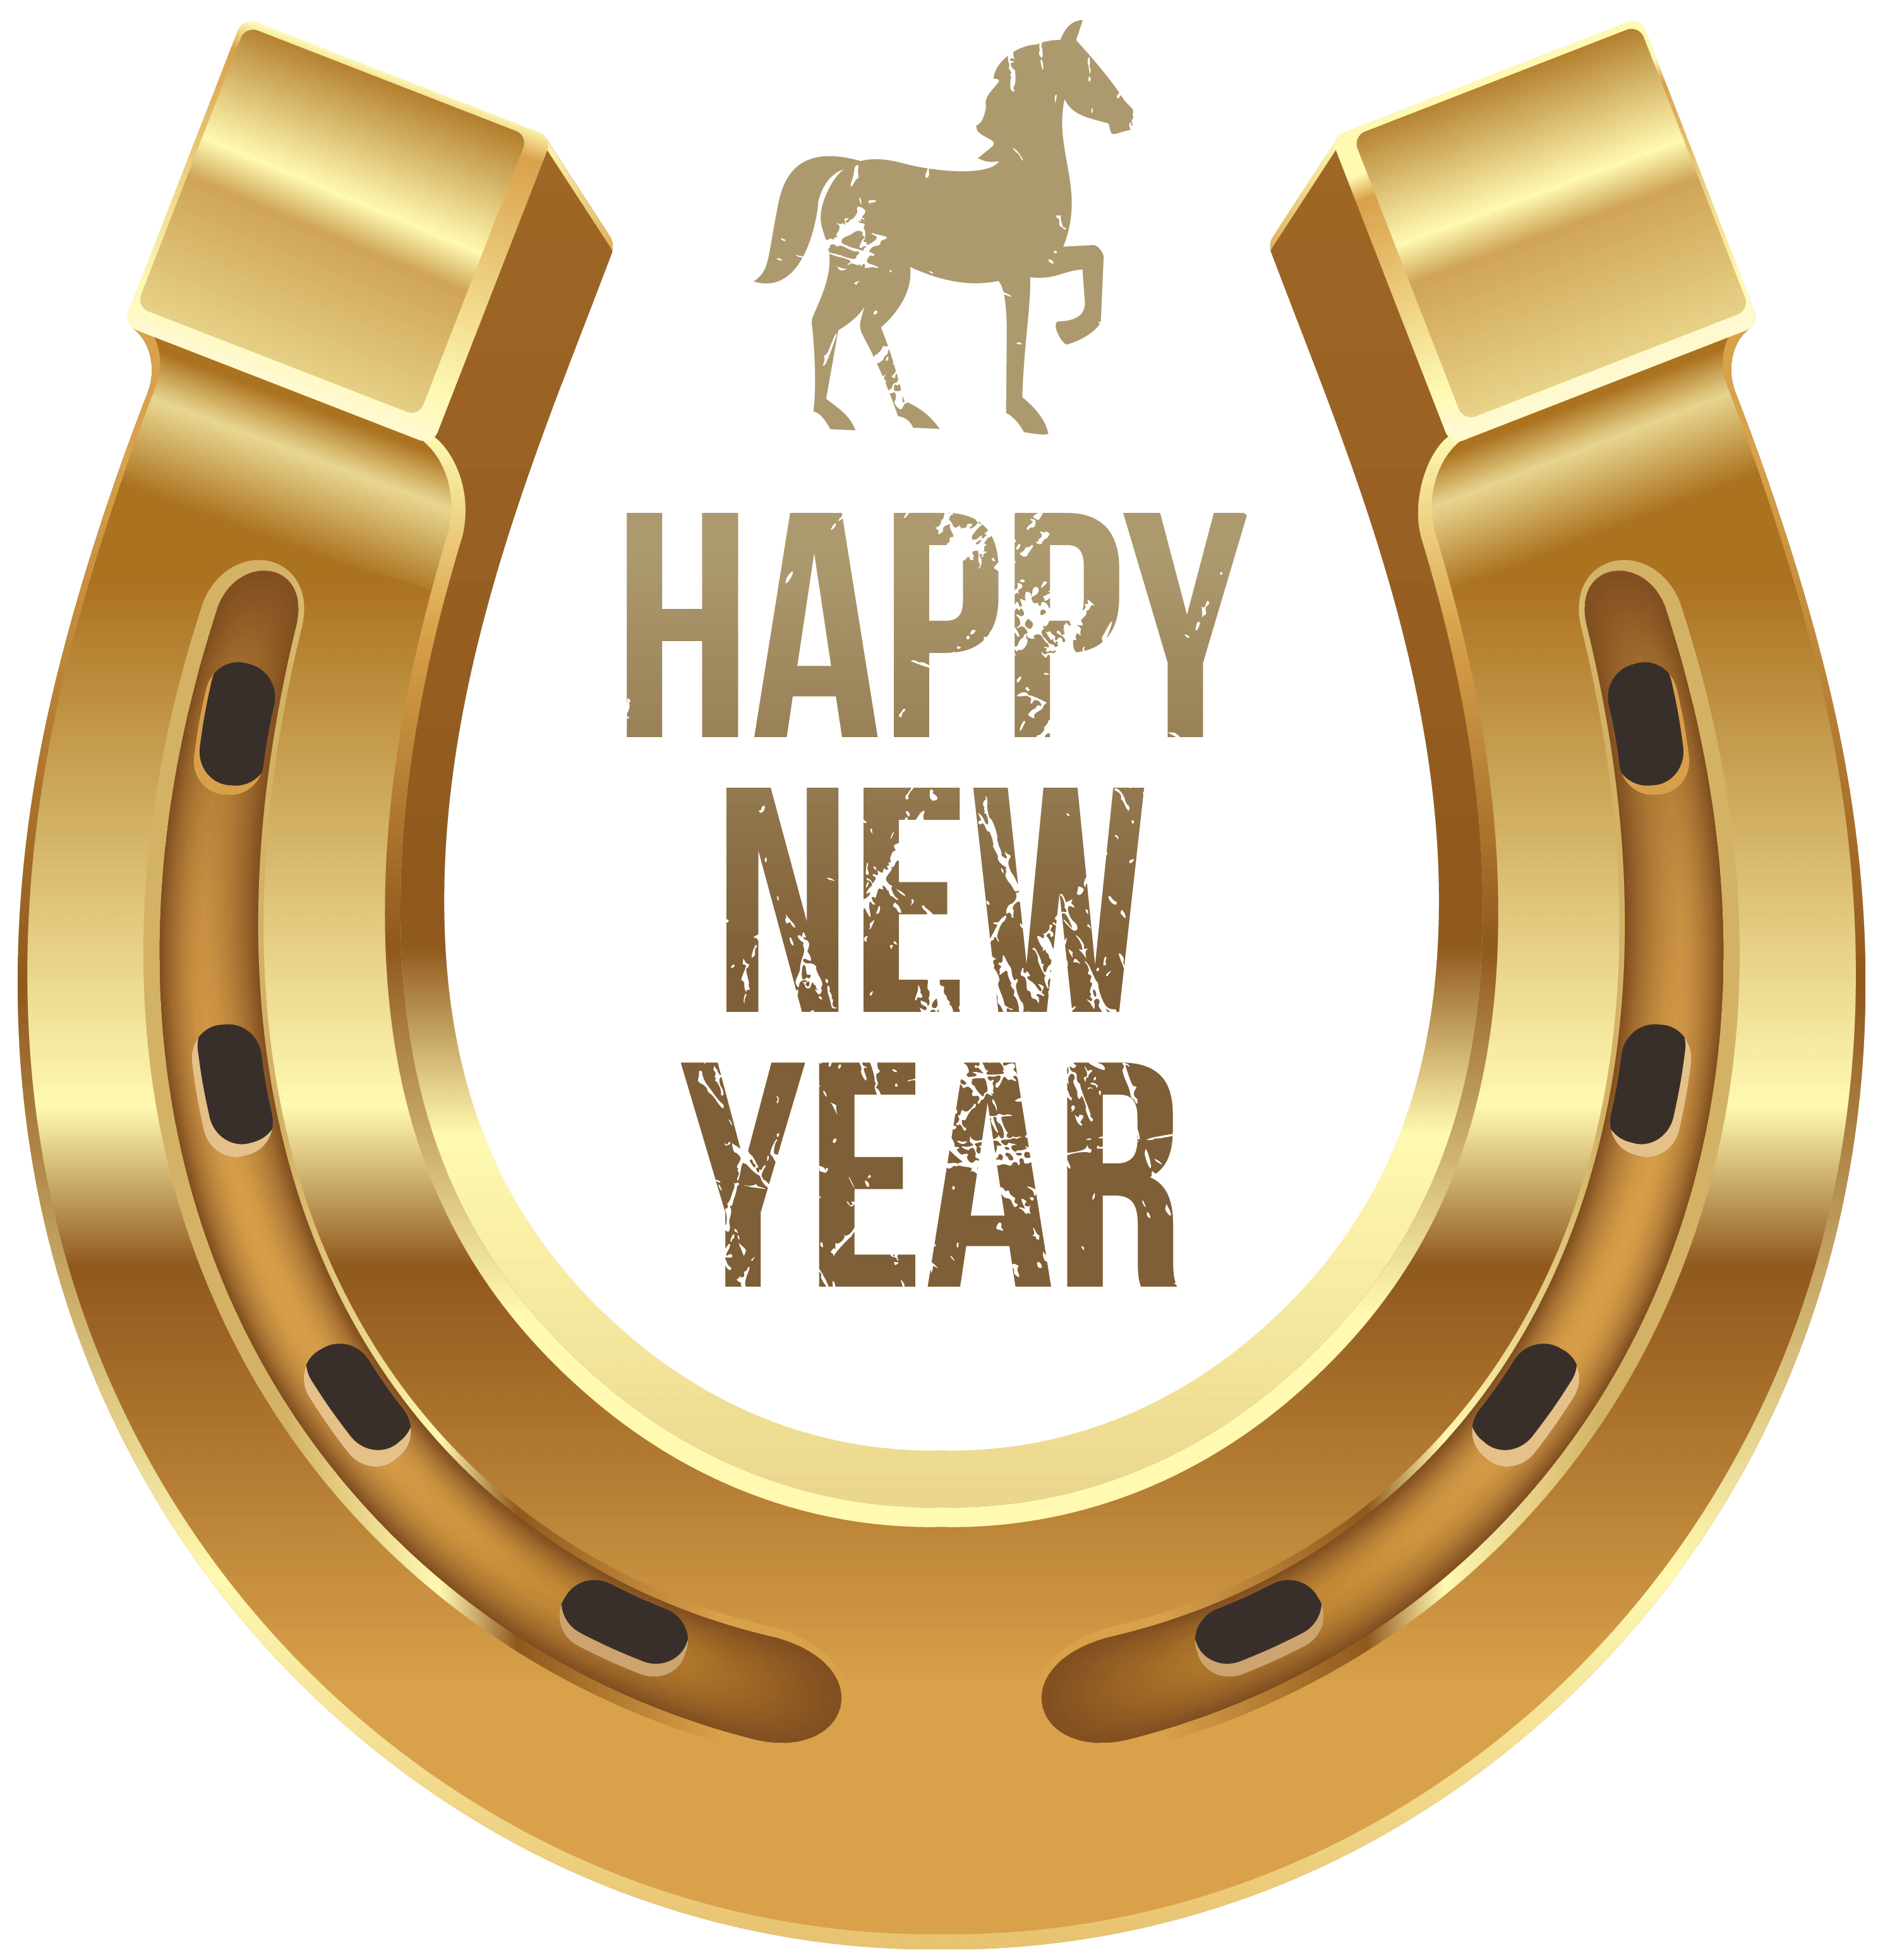 Horse and Horseshoe Logo - Happy New Year with Horse and Horseshoe PNG Clipart